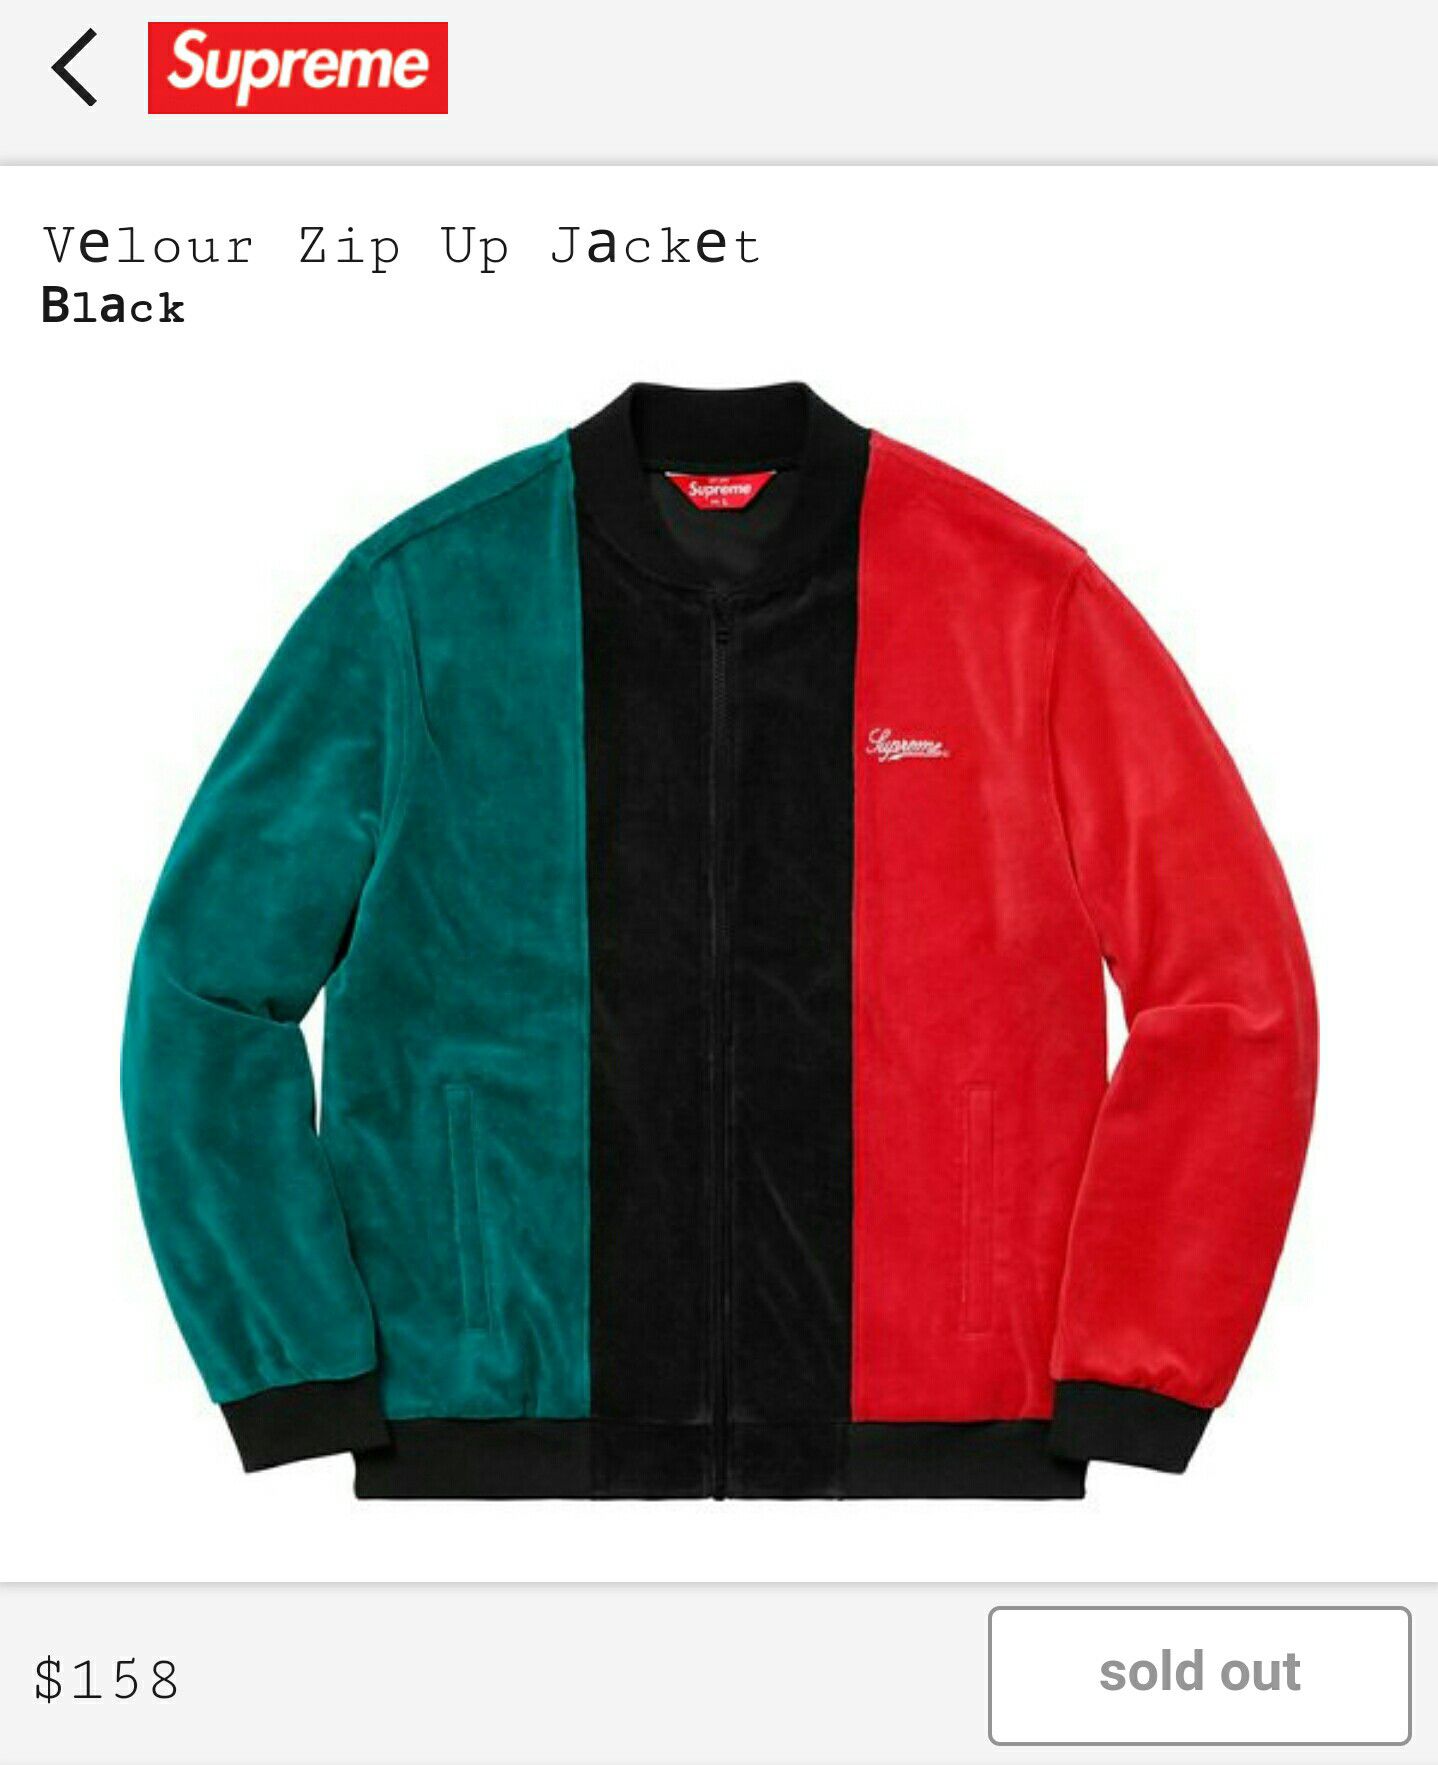 Ss18 Supreme Velour Zip Up Jacket Gucci Color way for Sale in La